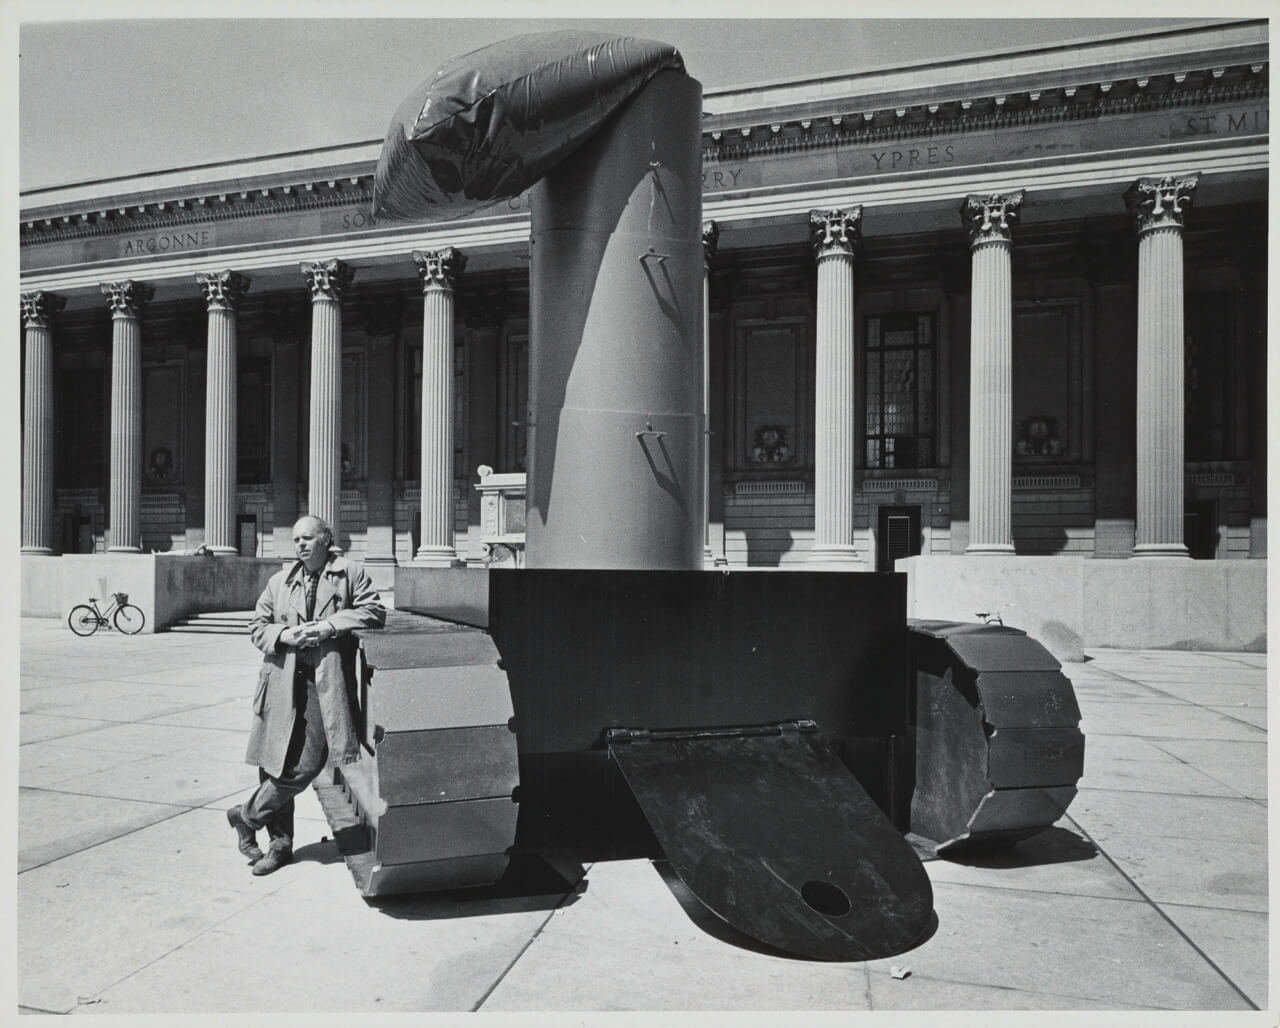 claes oldenburg leaning on a lipstick sculpture in a plaza